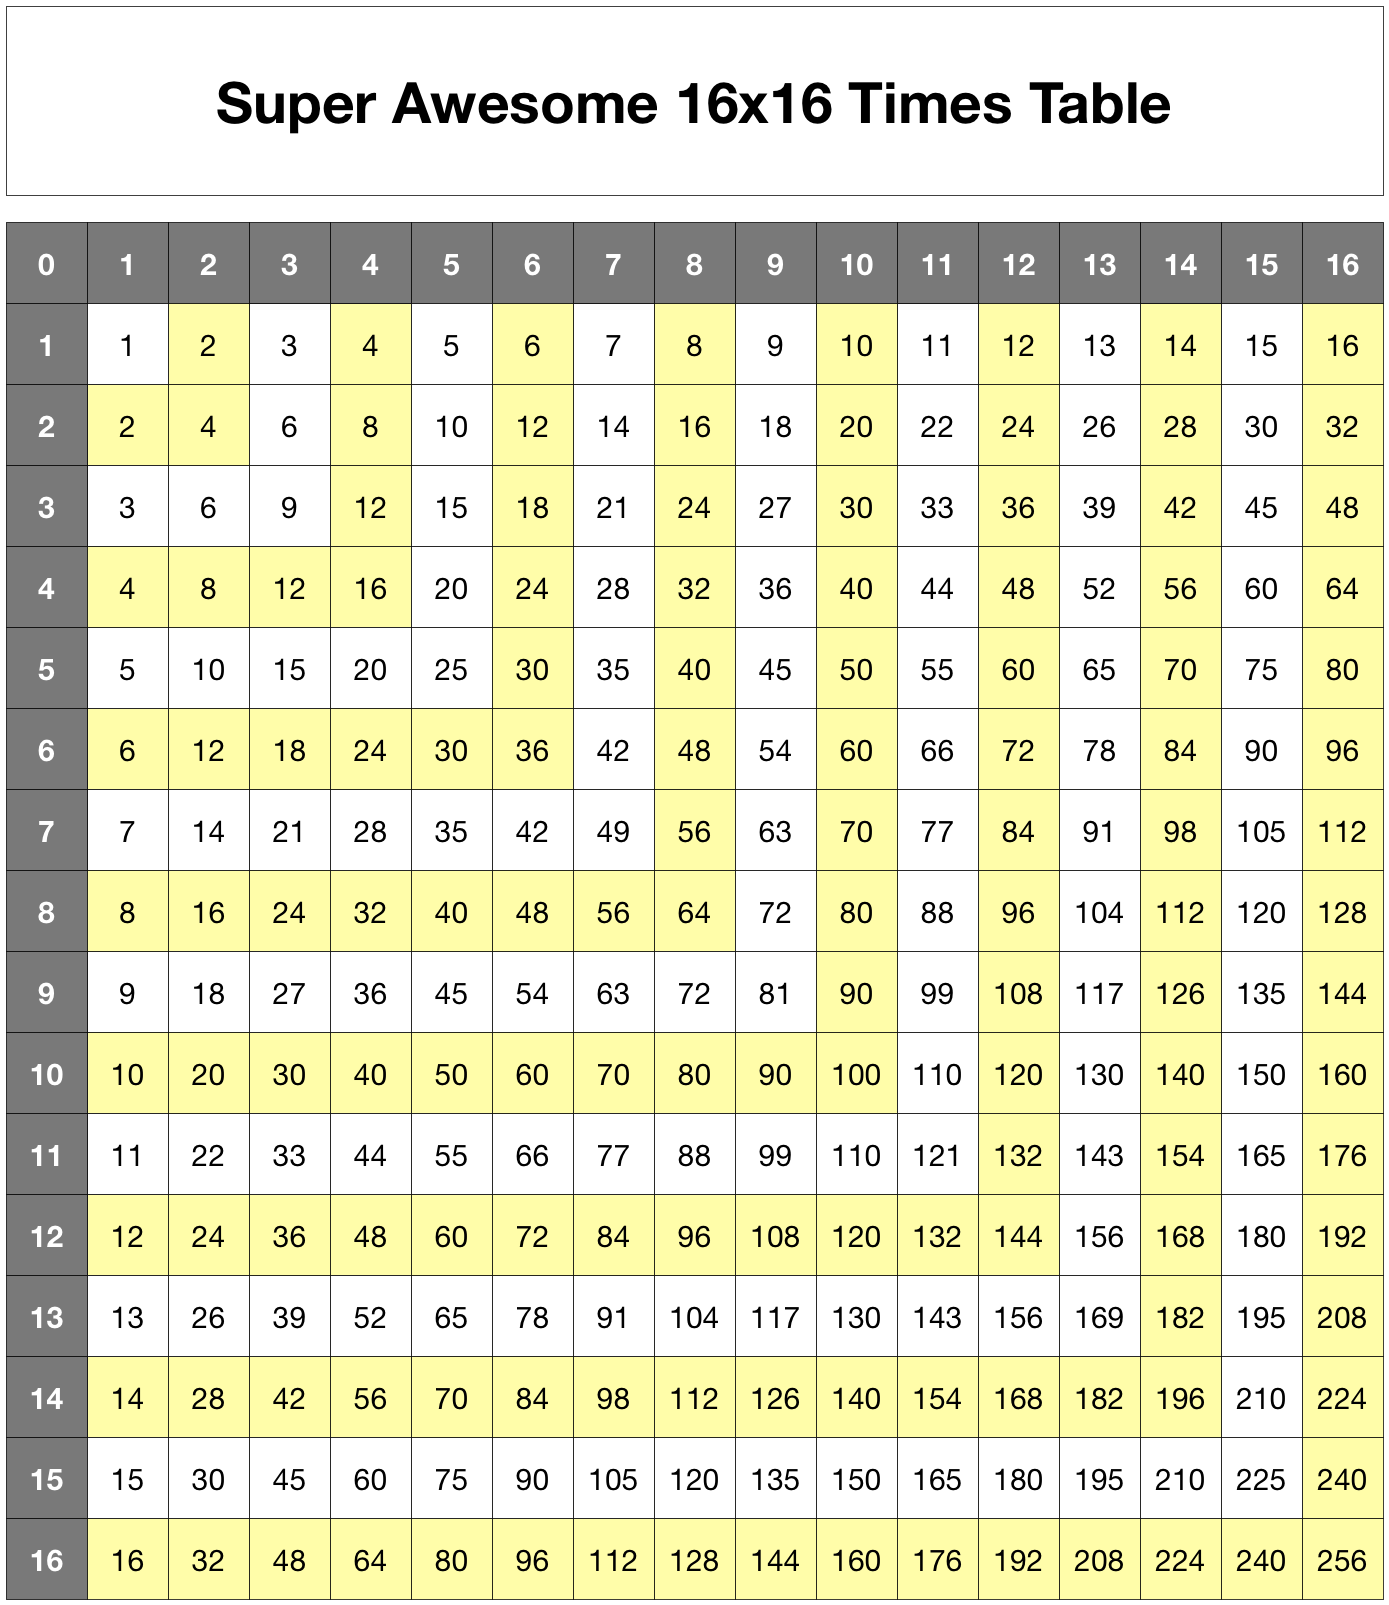 16x16 times table README md At Master Nathansmith 16x16 